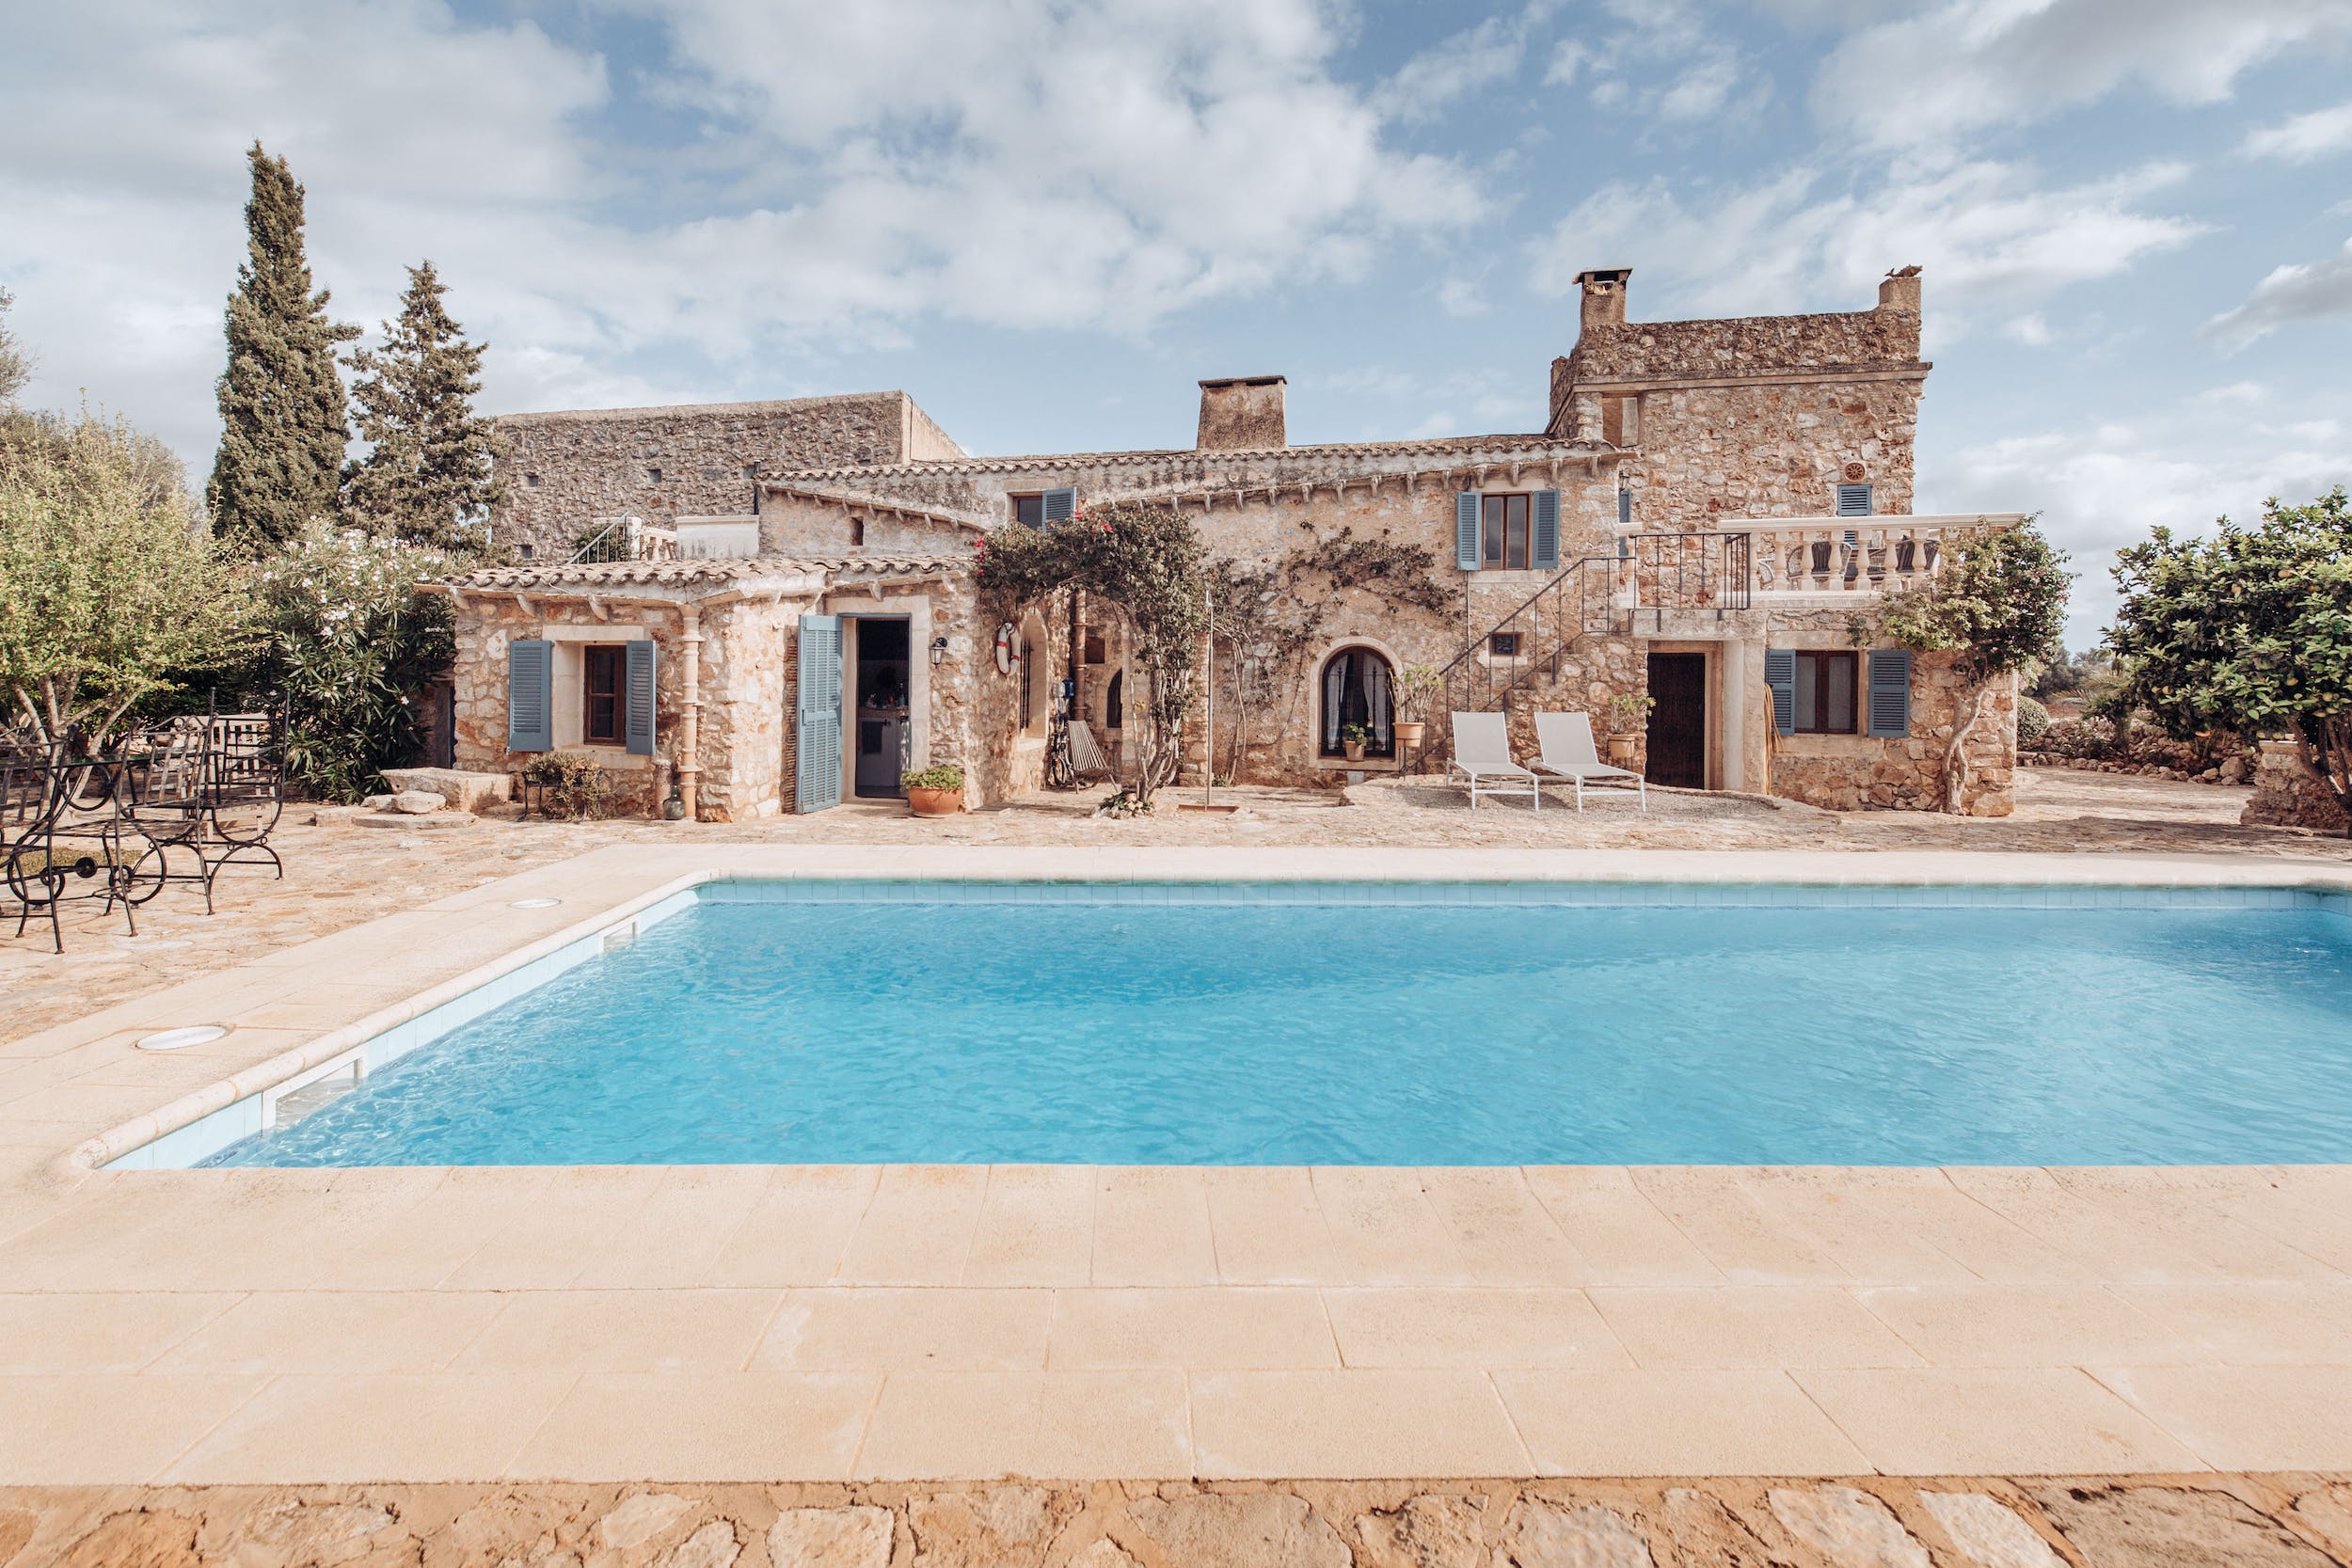 You are currently viewing Can Papaya – ‘A 300-year-old villa in rural east Mallorca.’